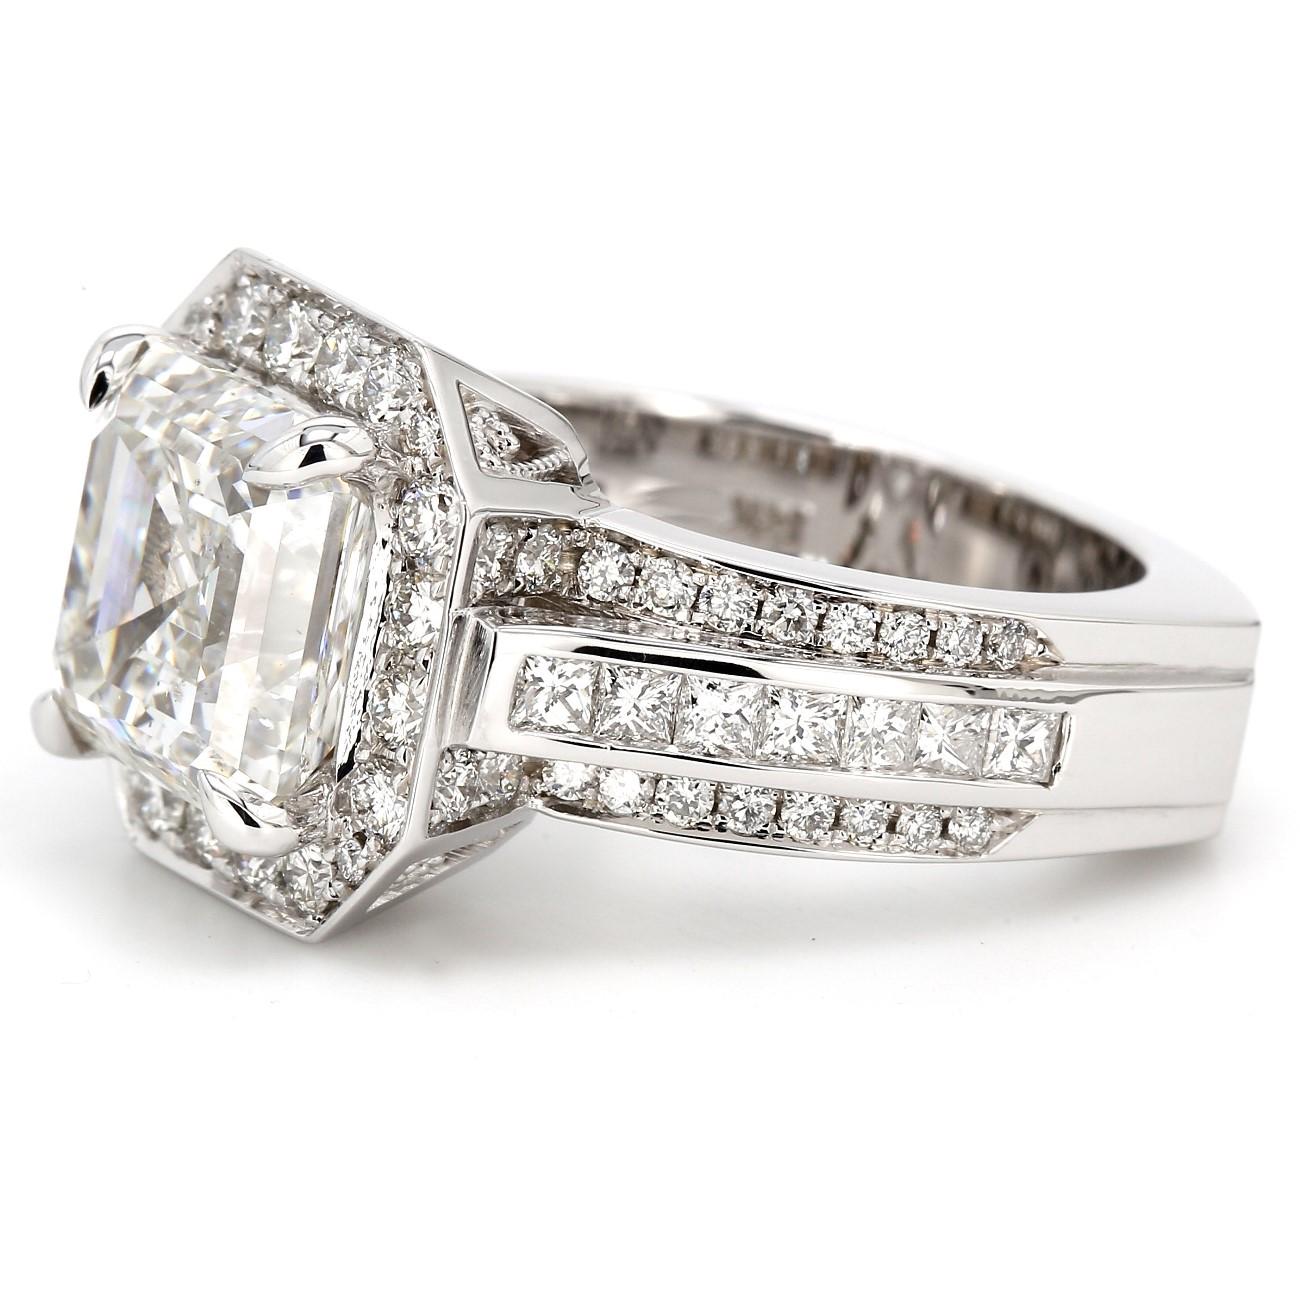 Halo ring in 14K white gold with pave set rounds and a GIA certified H/SI2 asscher cut diamond center stone. D6.51ct.t.w. (Center - 5.01ct.)